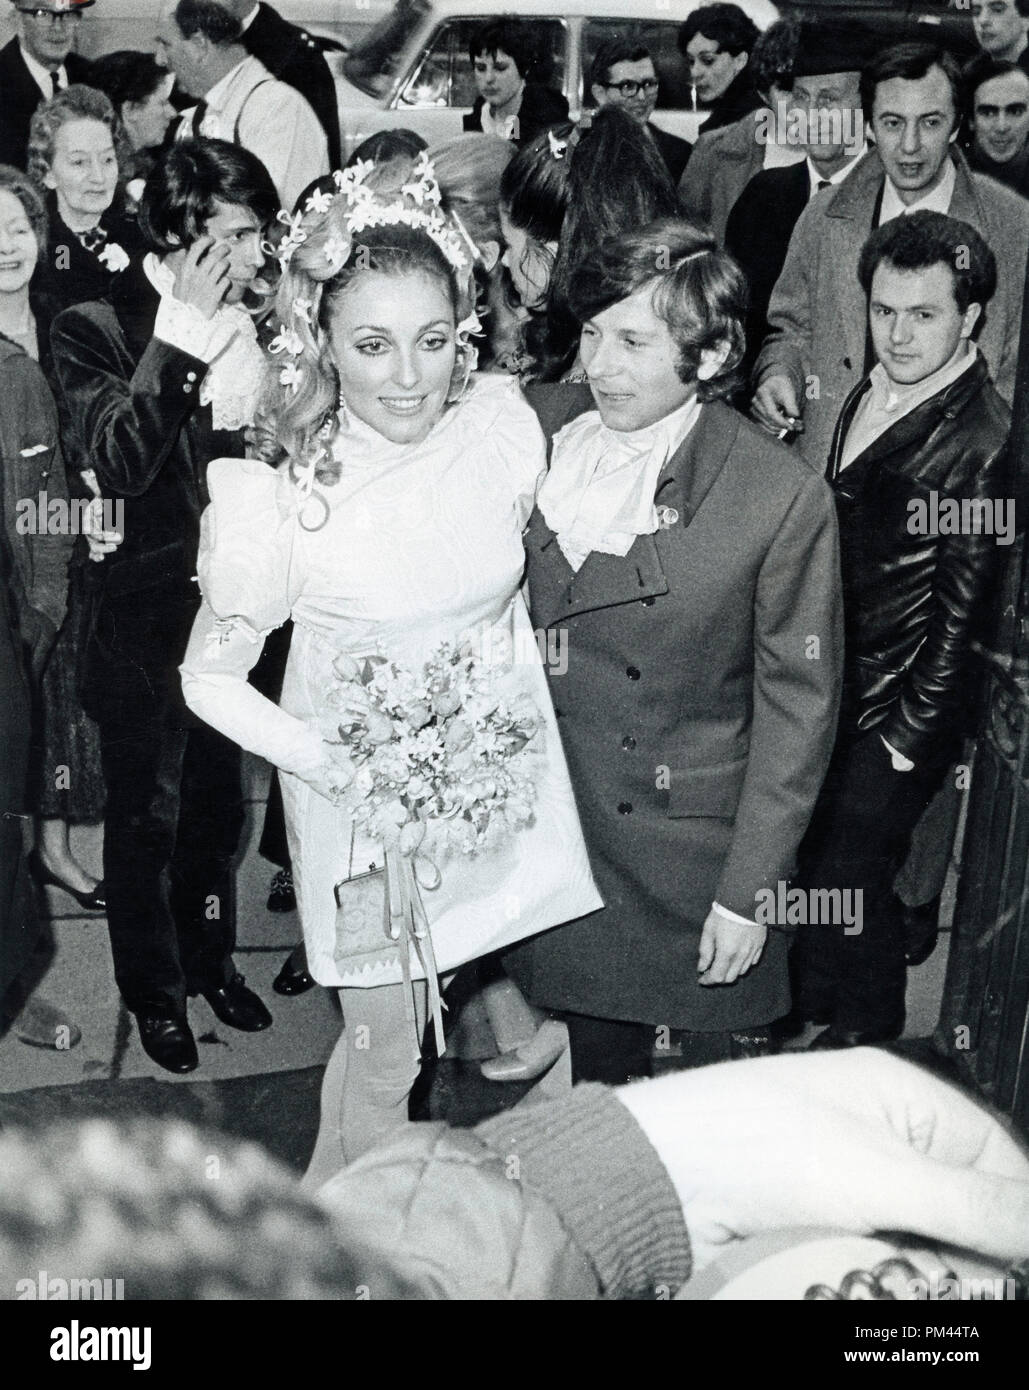 Sharon Tate and Roman Polanski on their wedding day, January 20,1968. File  Reference #1027 019THA © JRC /The Hollywood Archive - All Rights Reserved  Stock Photo - Alamy